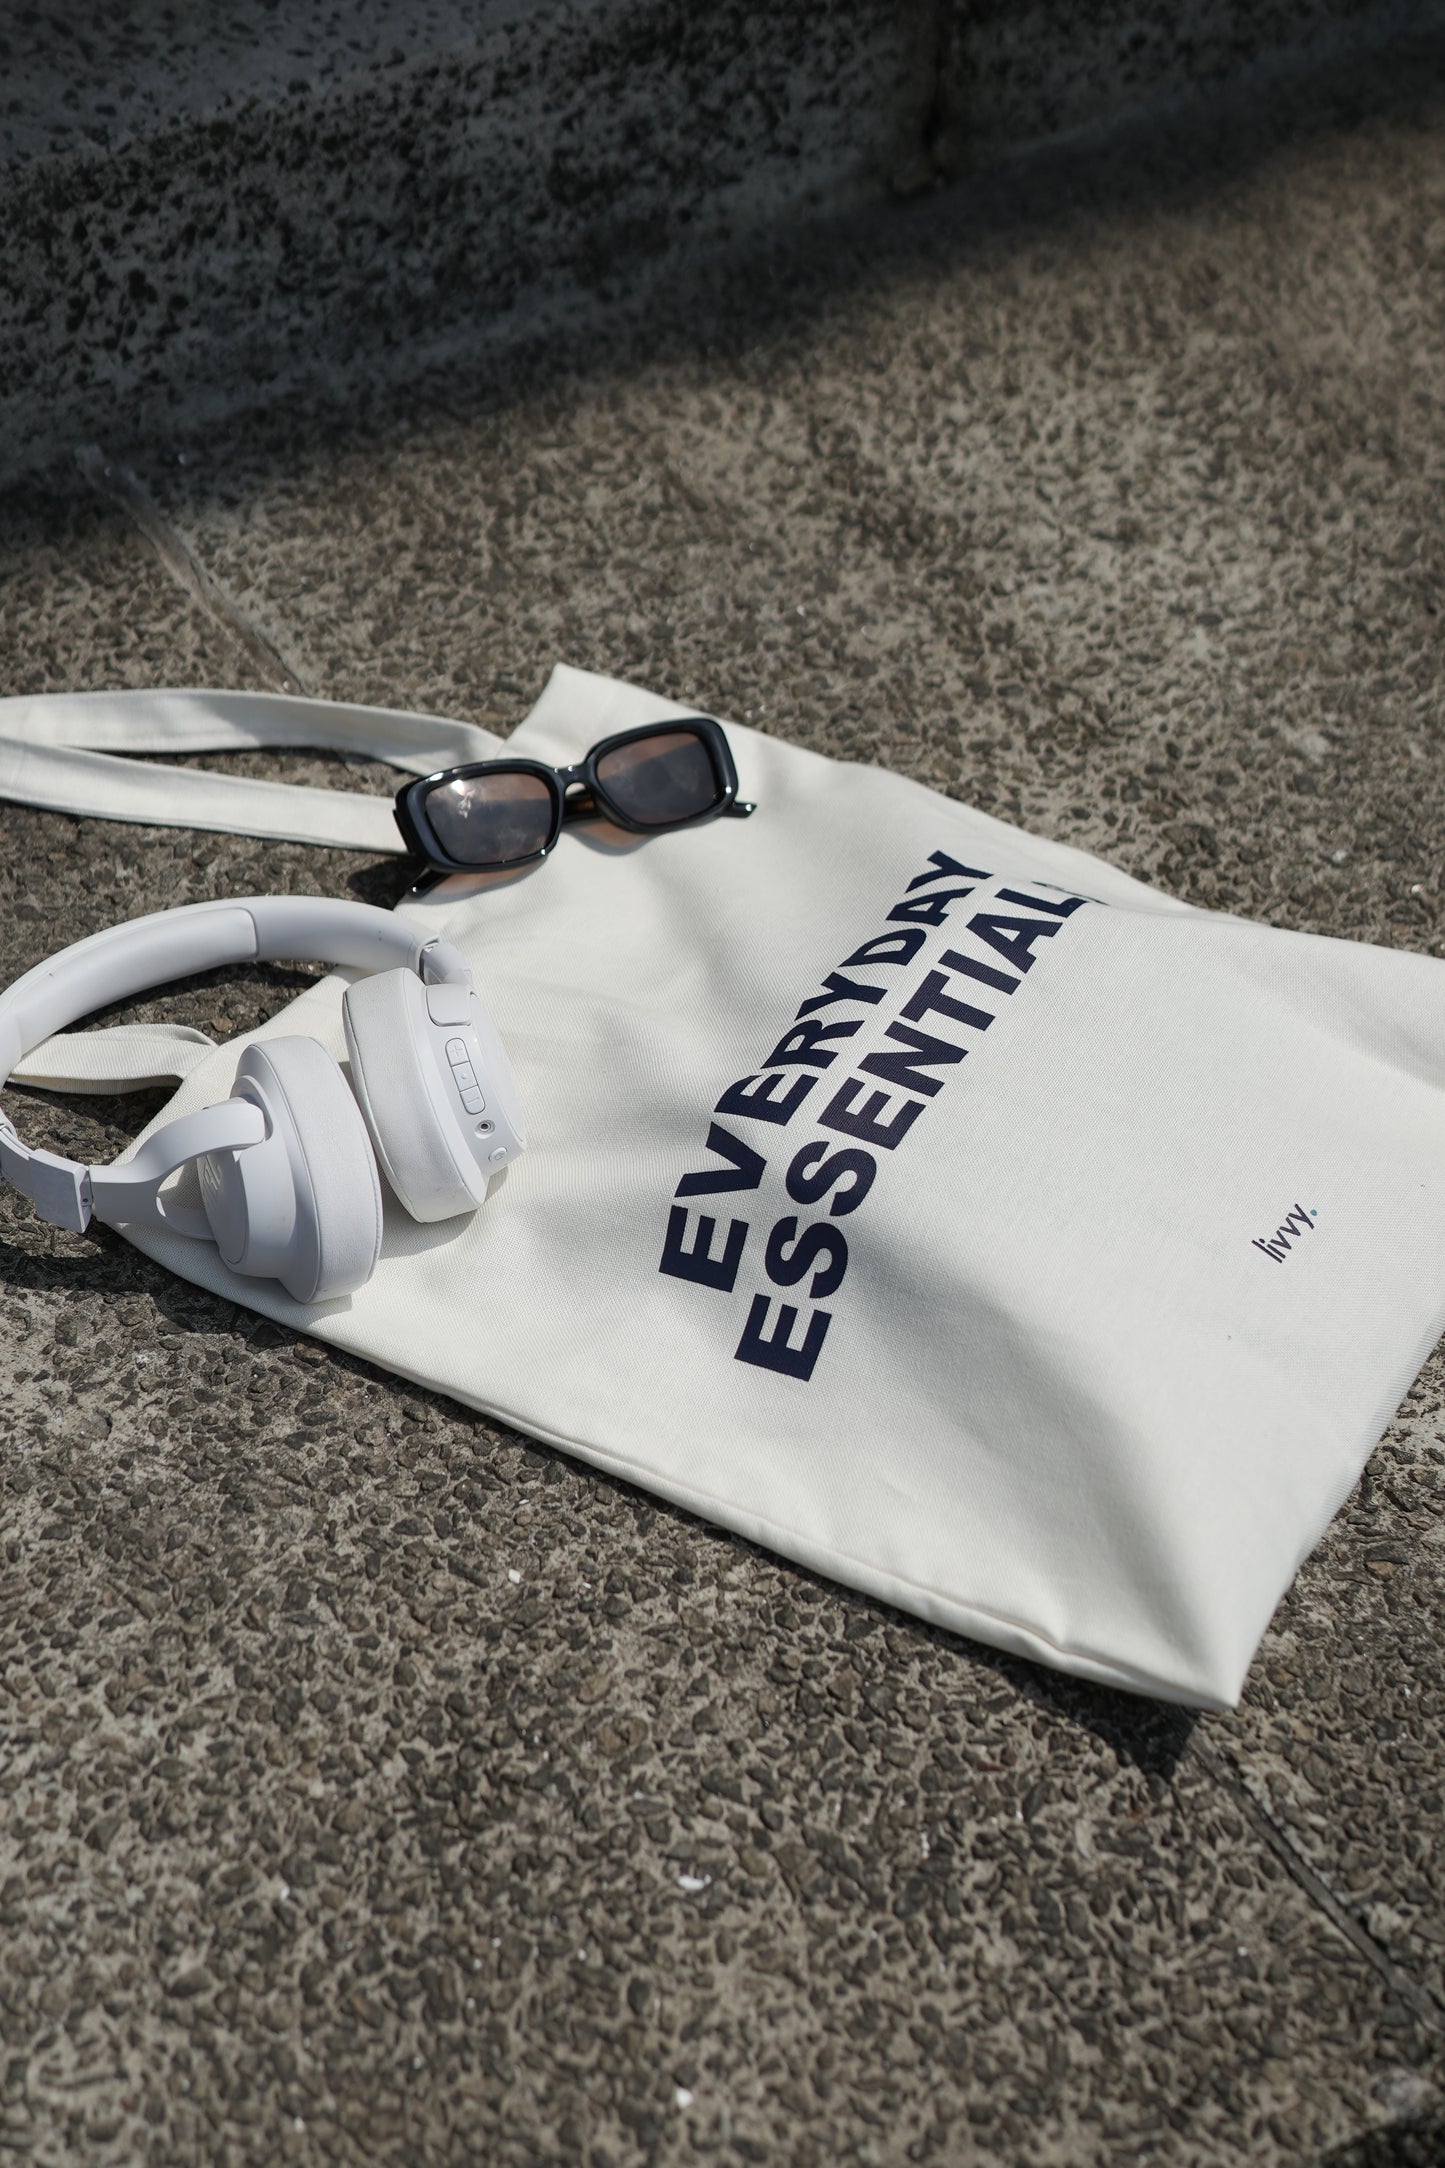 The Everyday Essentials Tote bag- USE CODE "BANK15" TO GET  15% OFF